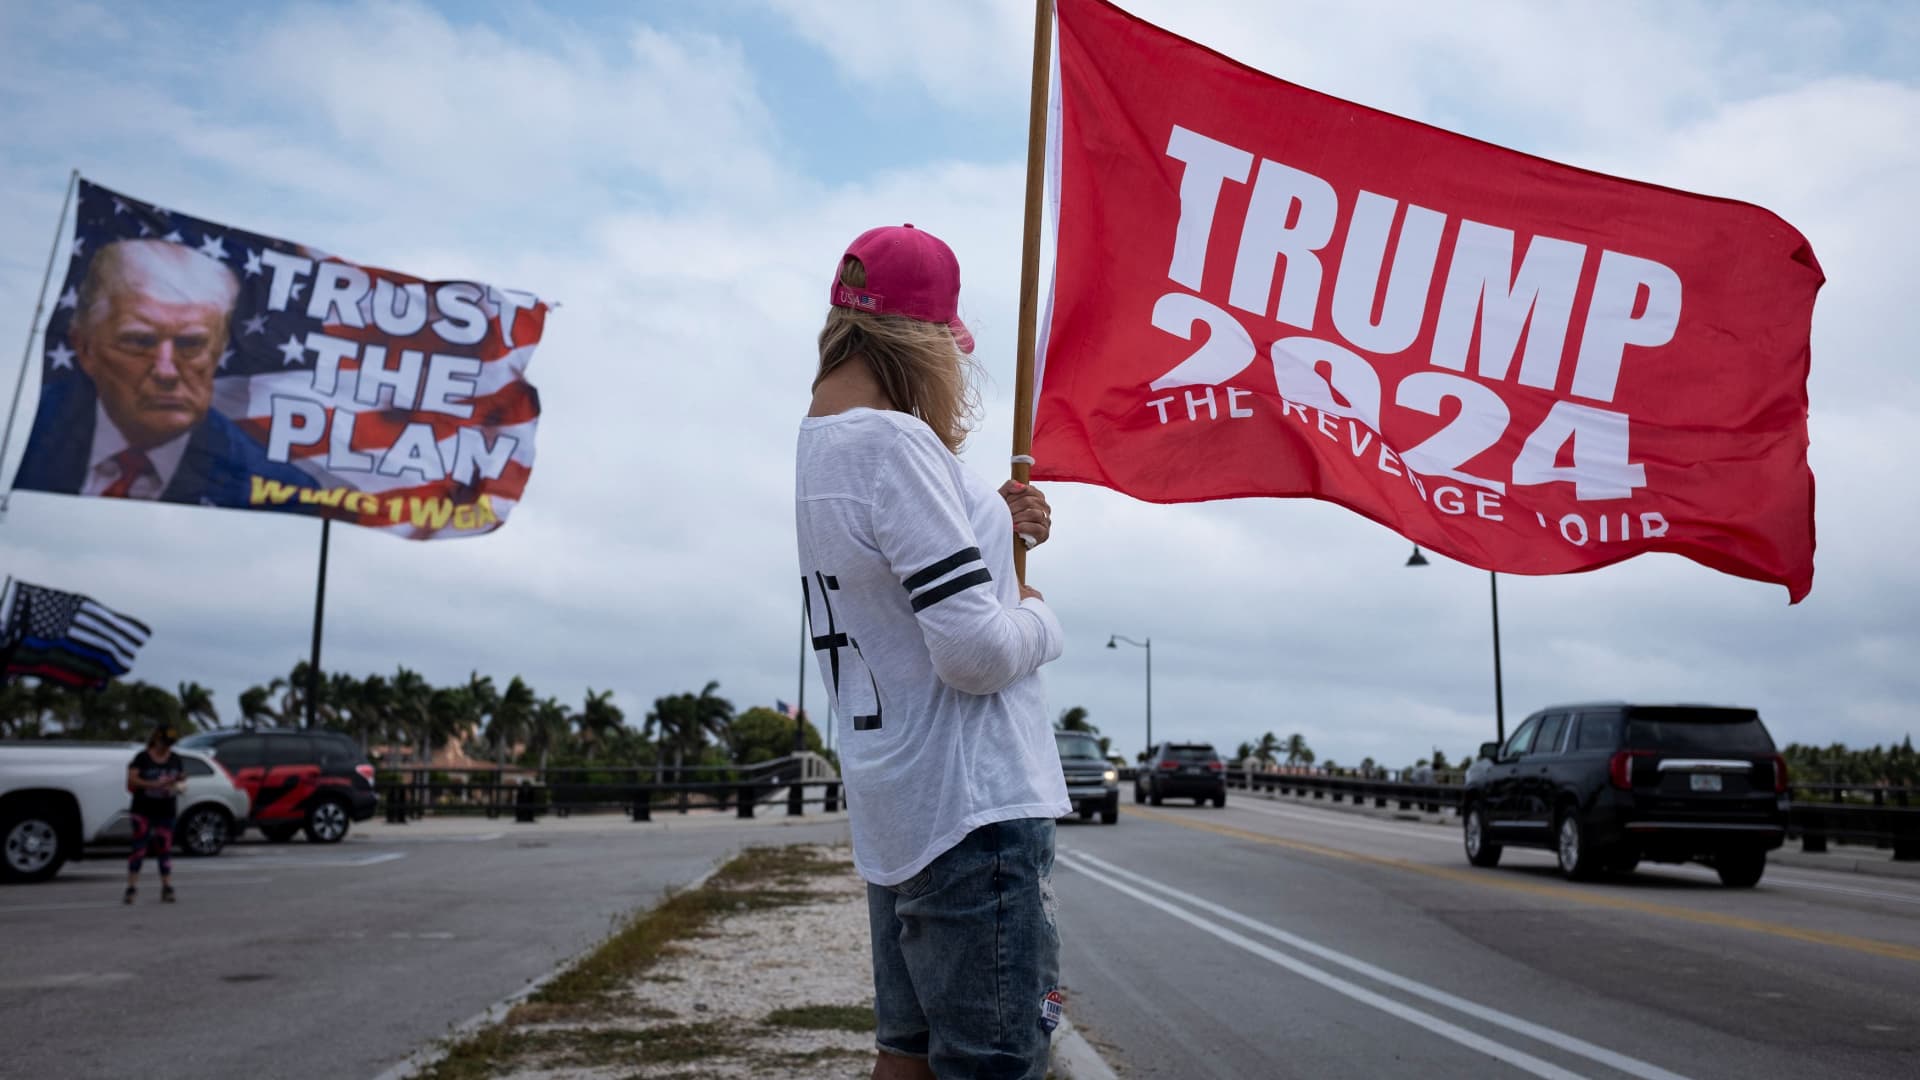 Supporters of former U.S. President Donald Trump gather outside his Mar-a-Lago resort after he posted a message on his Truth Social account saying that he expects to be arrested on Tuesday, and called on his supporters to protest, in Palm Beach, Florida, U.S. March 19, 2023. 